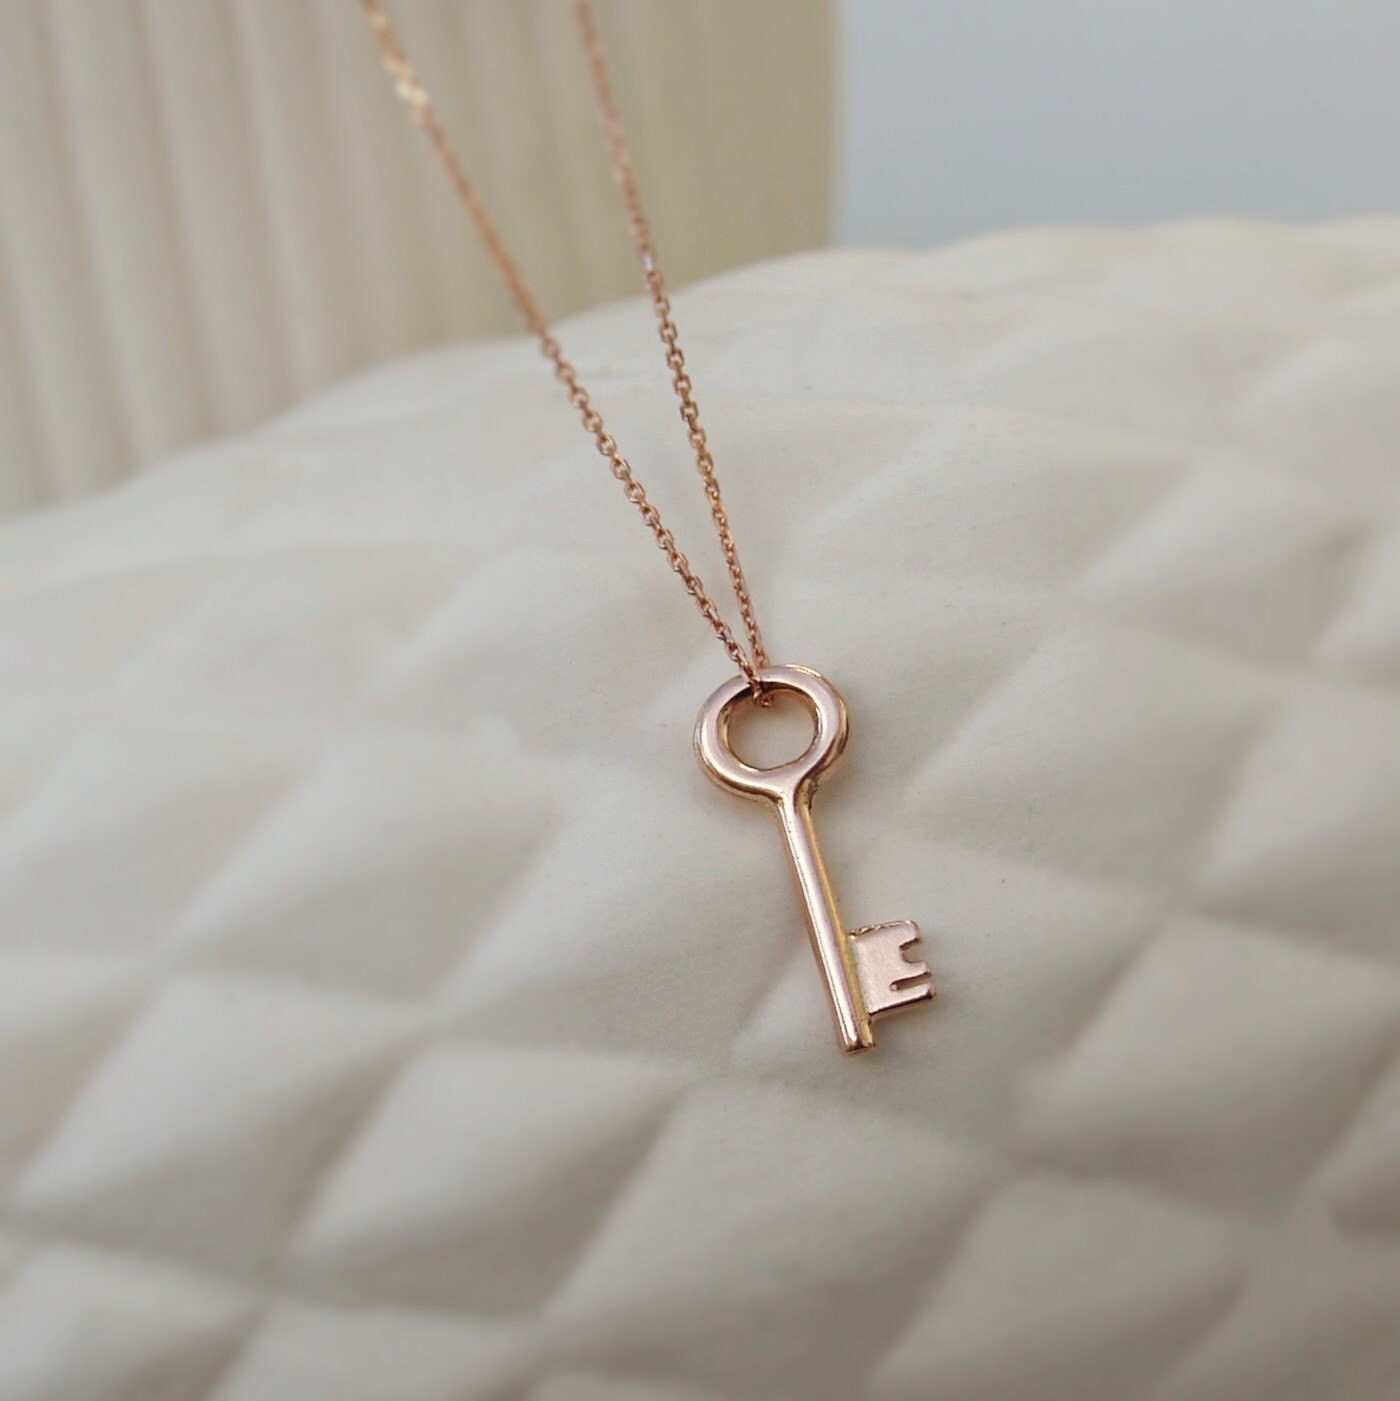 9ct solid rose gold small and dainty key charm pendant and chain